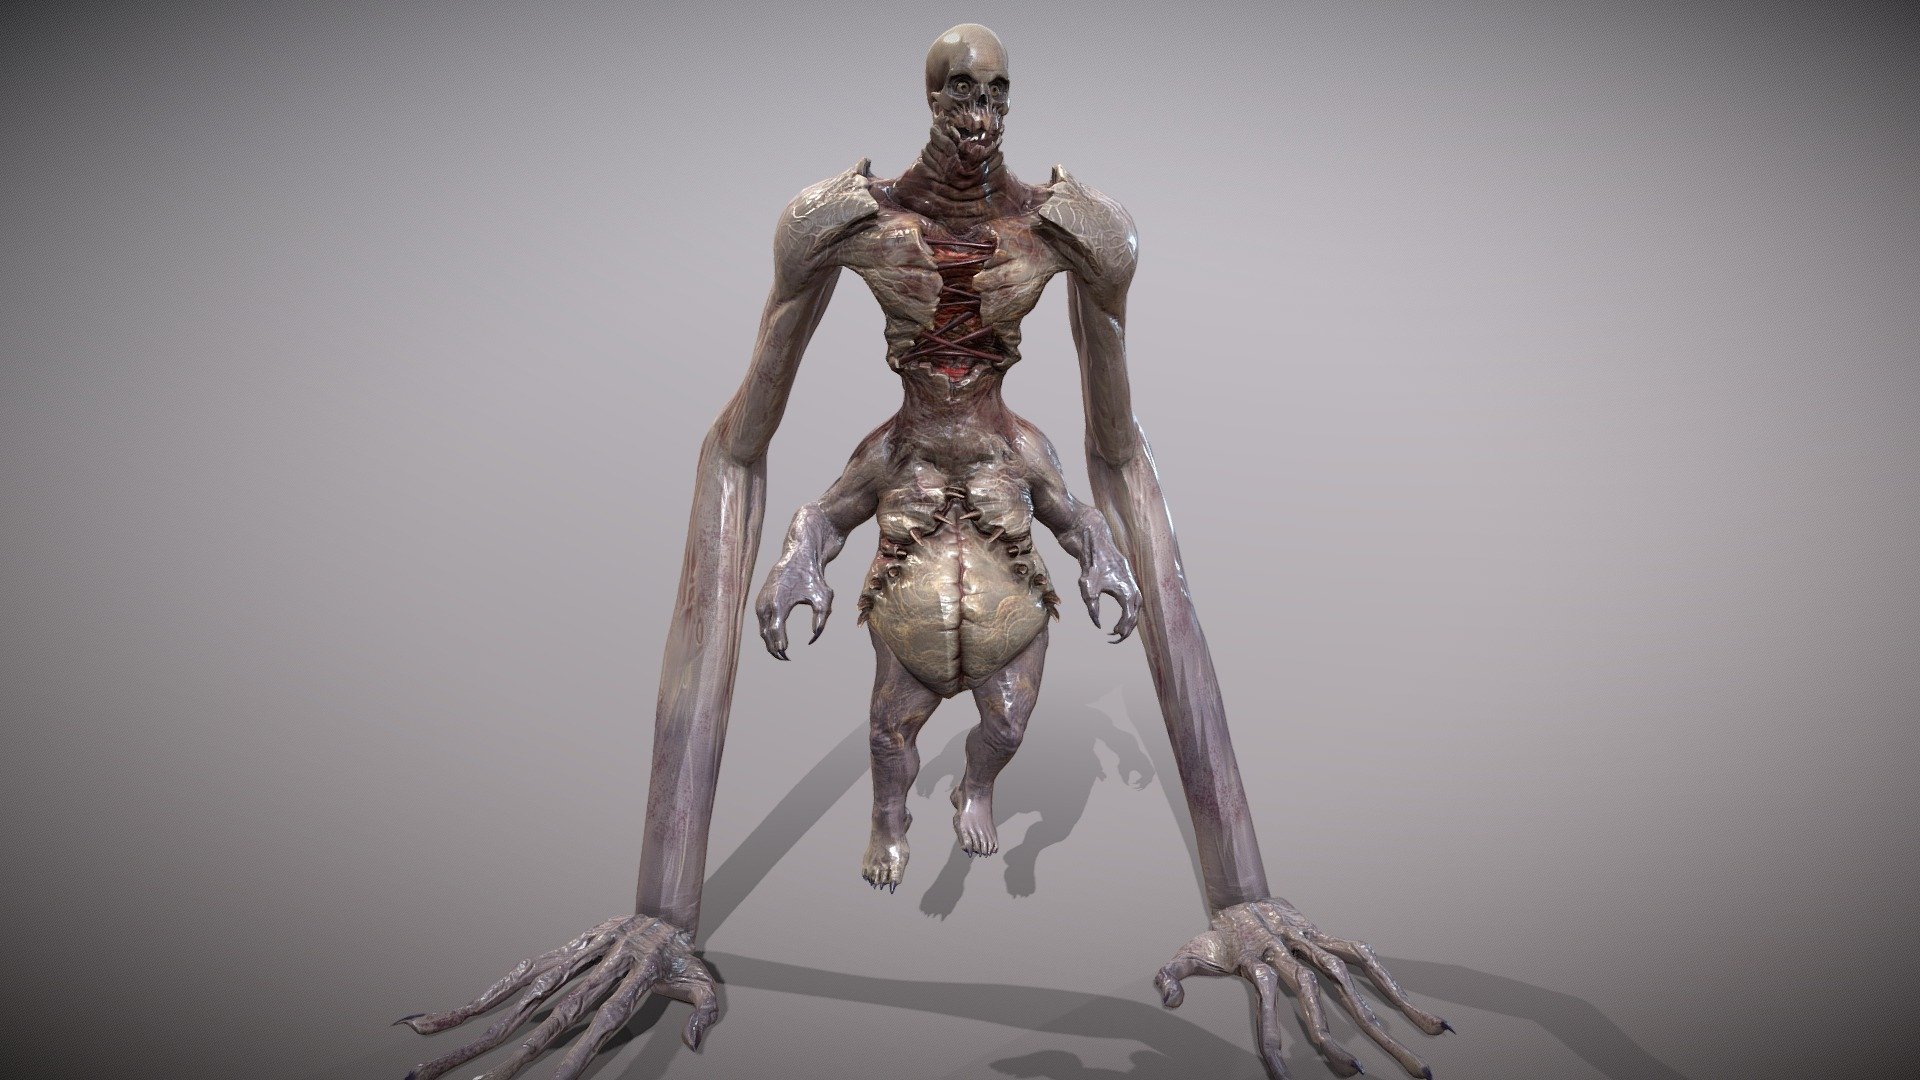 A fantastic mutant model with giant hands, perfect for playing in the genre of horor, will be able to scare anyone)

Video preview with all animations: https://youtu.be/6FqS5g5bXKU

Name of animations: (x10)

Attack (x4)
Idle (x2)
Walk(x1)
Run(x1)
Take damage(x1)
Death(x1)

number of triangles: 34272

number of polygons: 18185 - Giant Mutant - Buy Royalty Free 3D model by Ecliptica 3d model